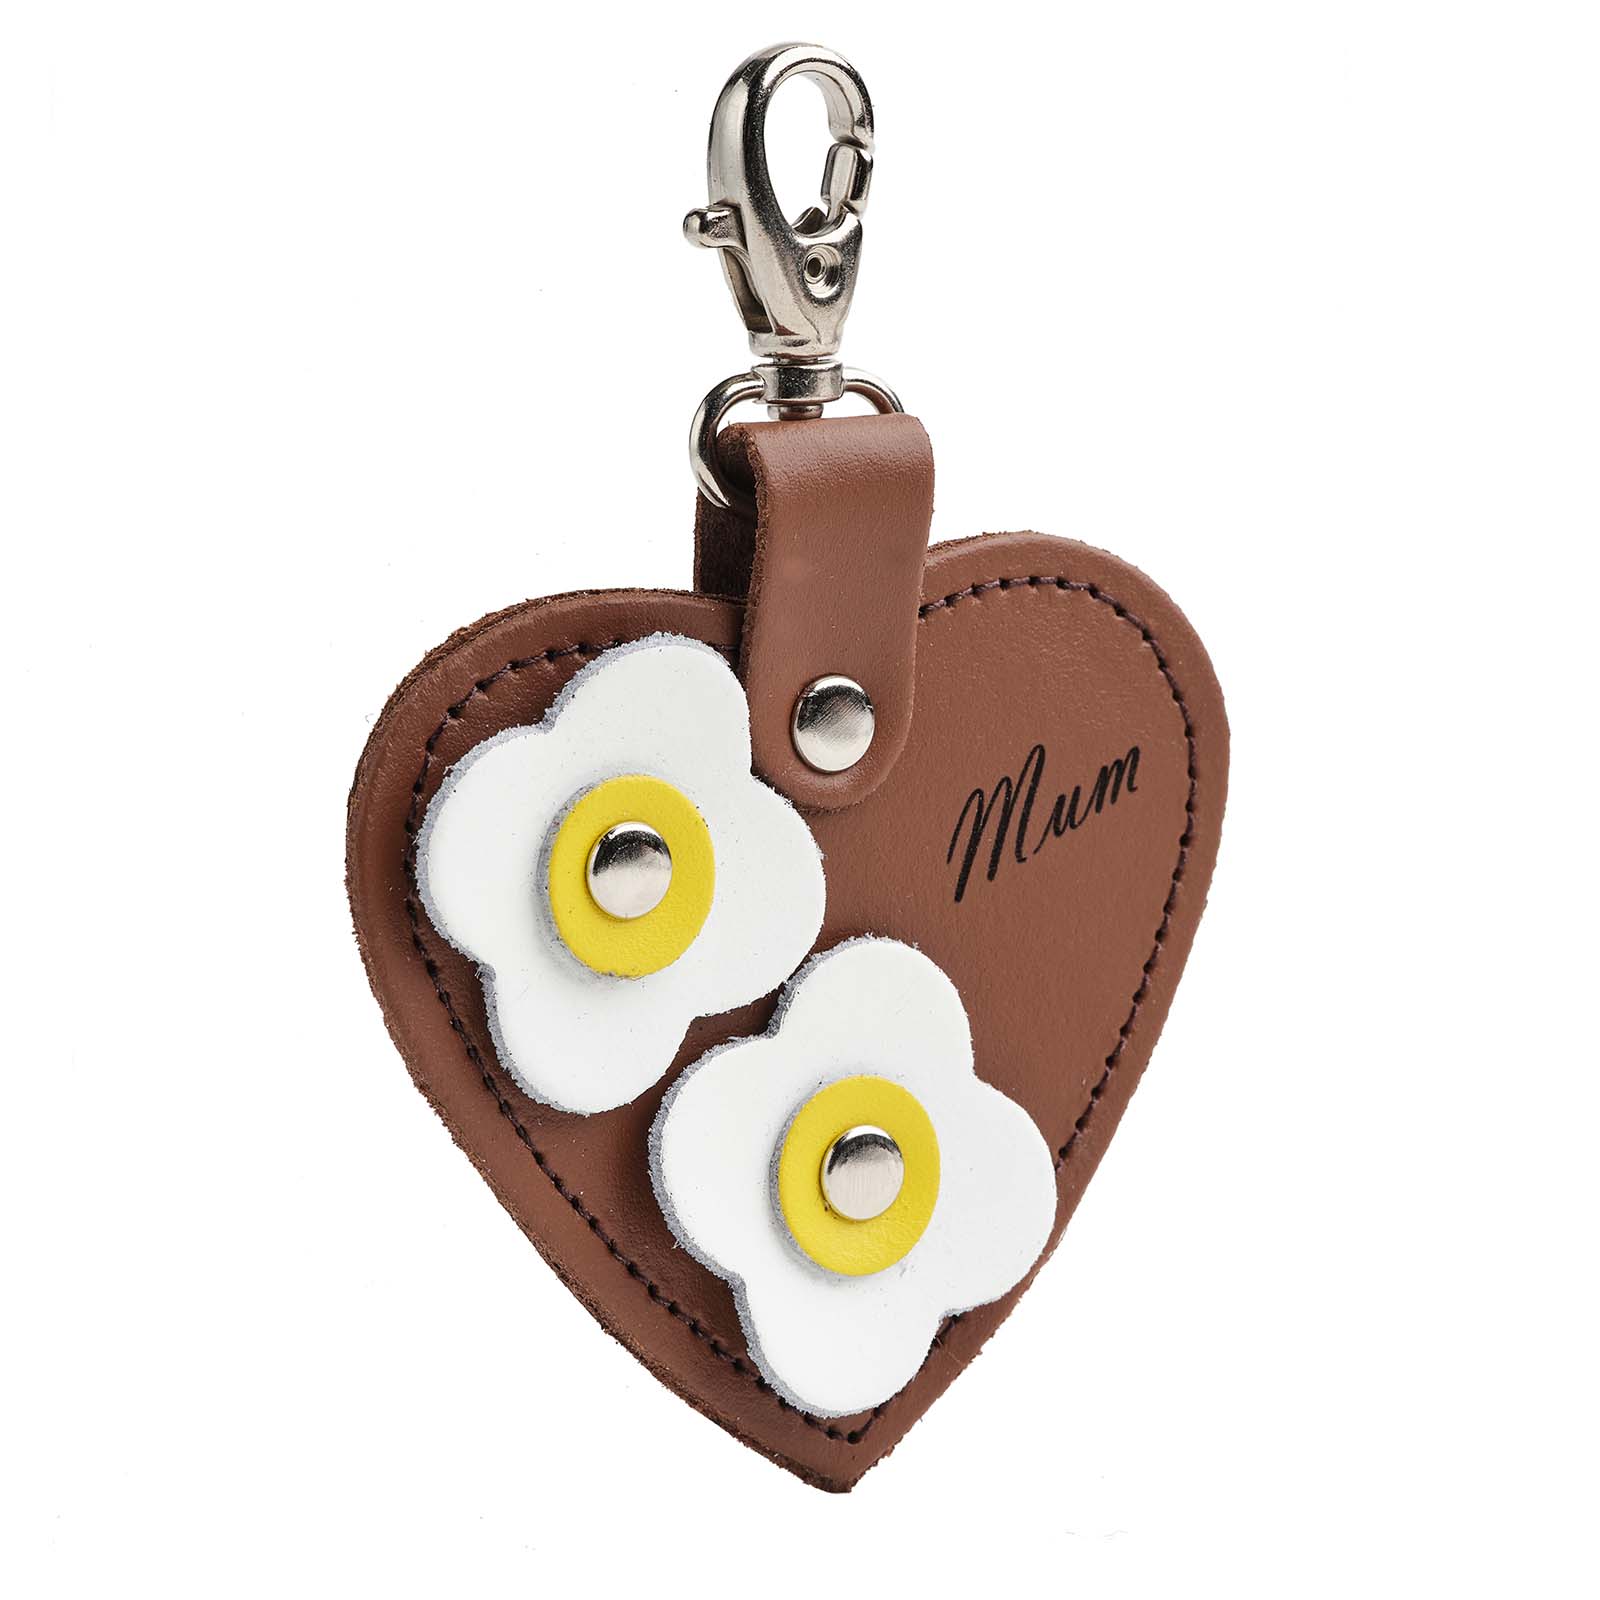 Love heart bag charm - with ’Mum’ engraving and flower appliques - Chestnut